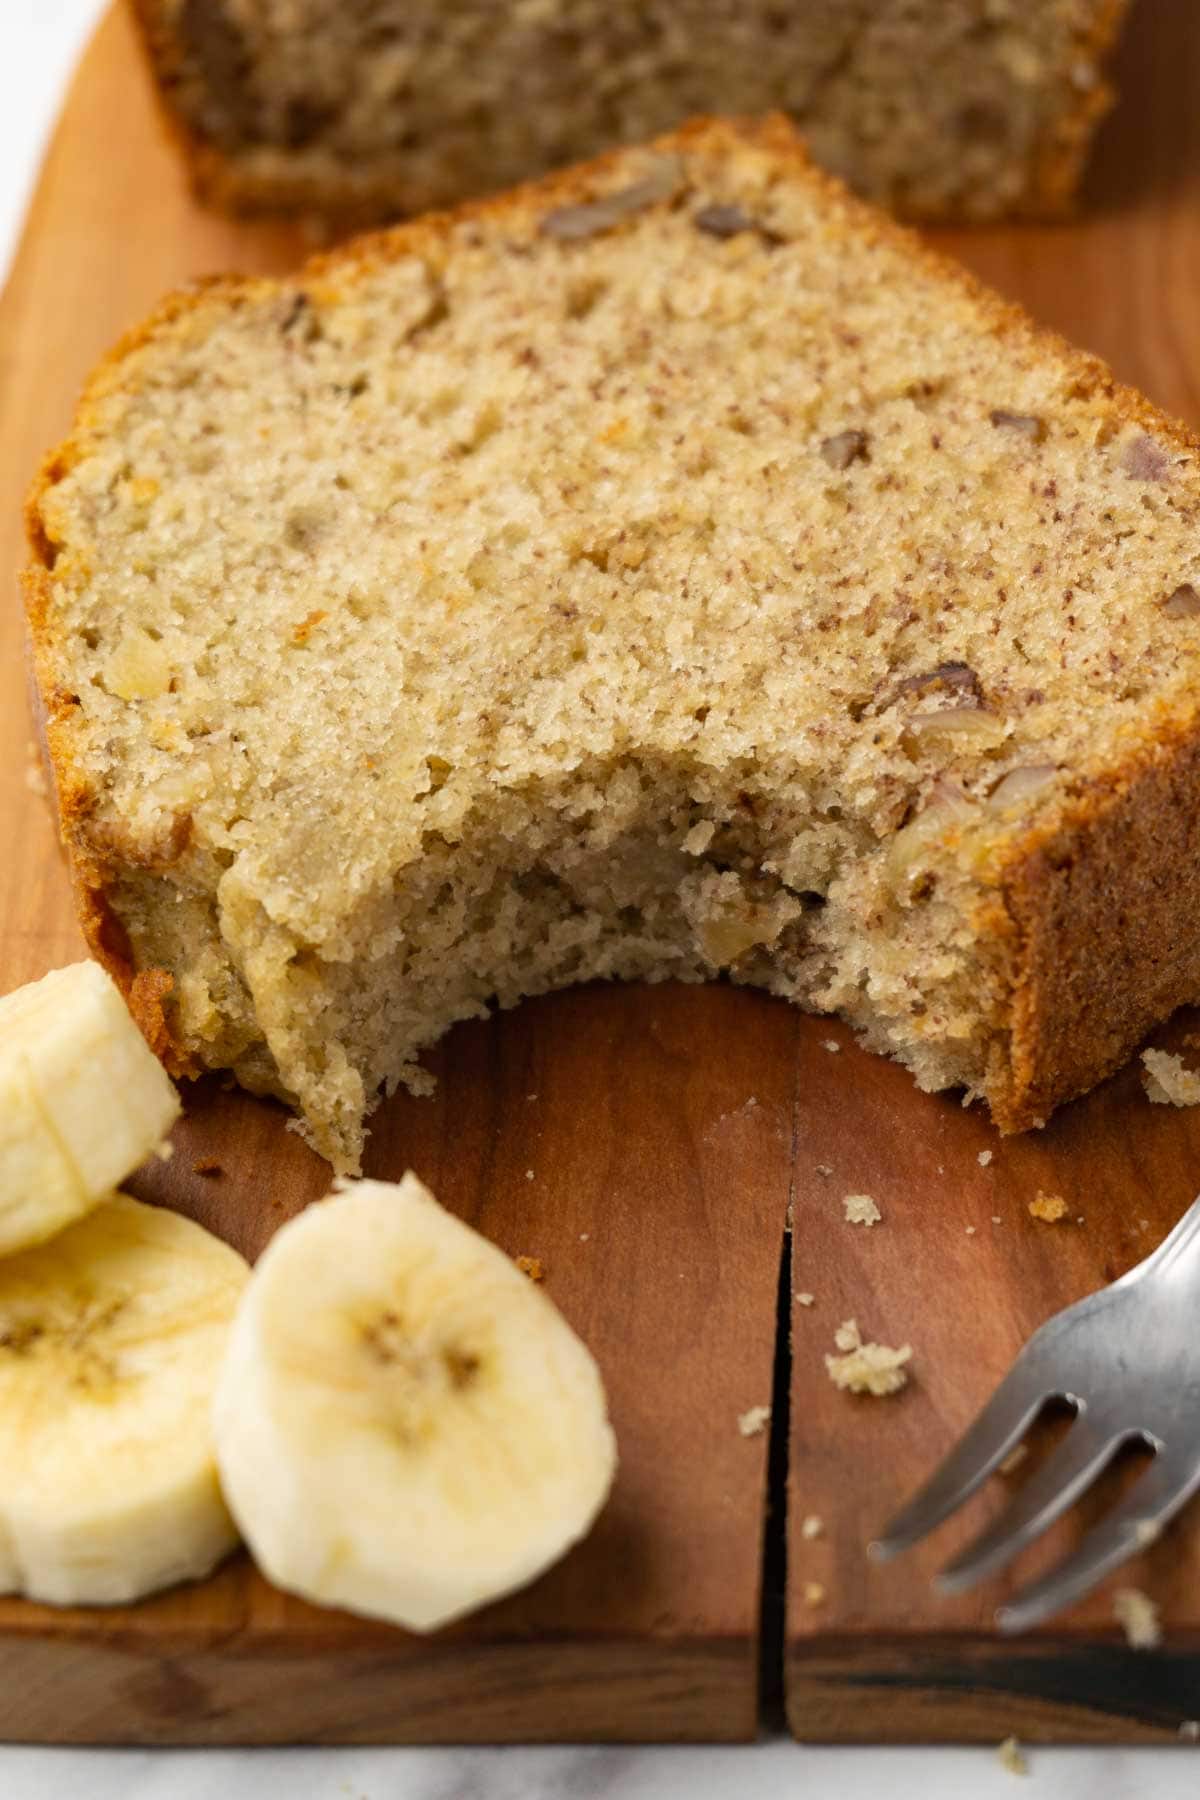 A slice of banana bread with walnuts on a wooden board; one bite was taken.